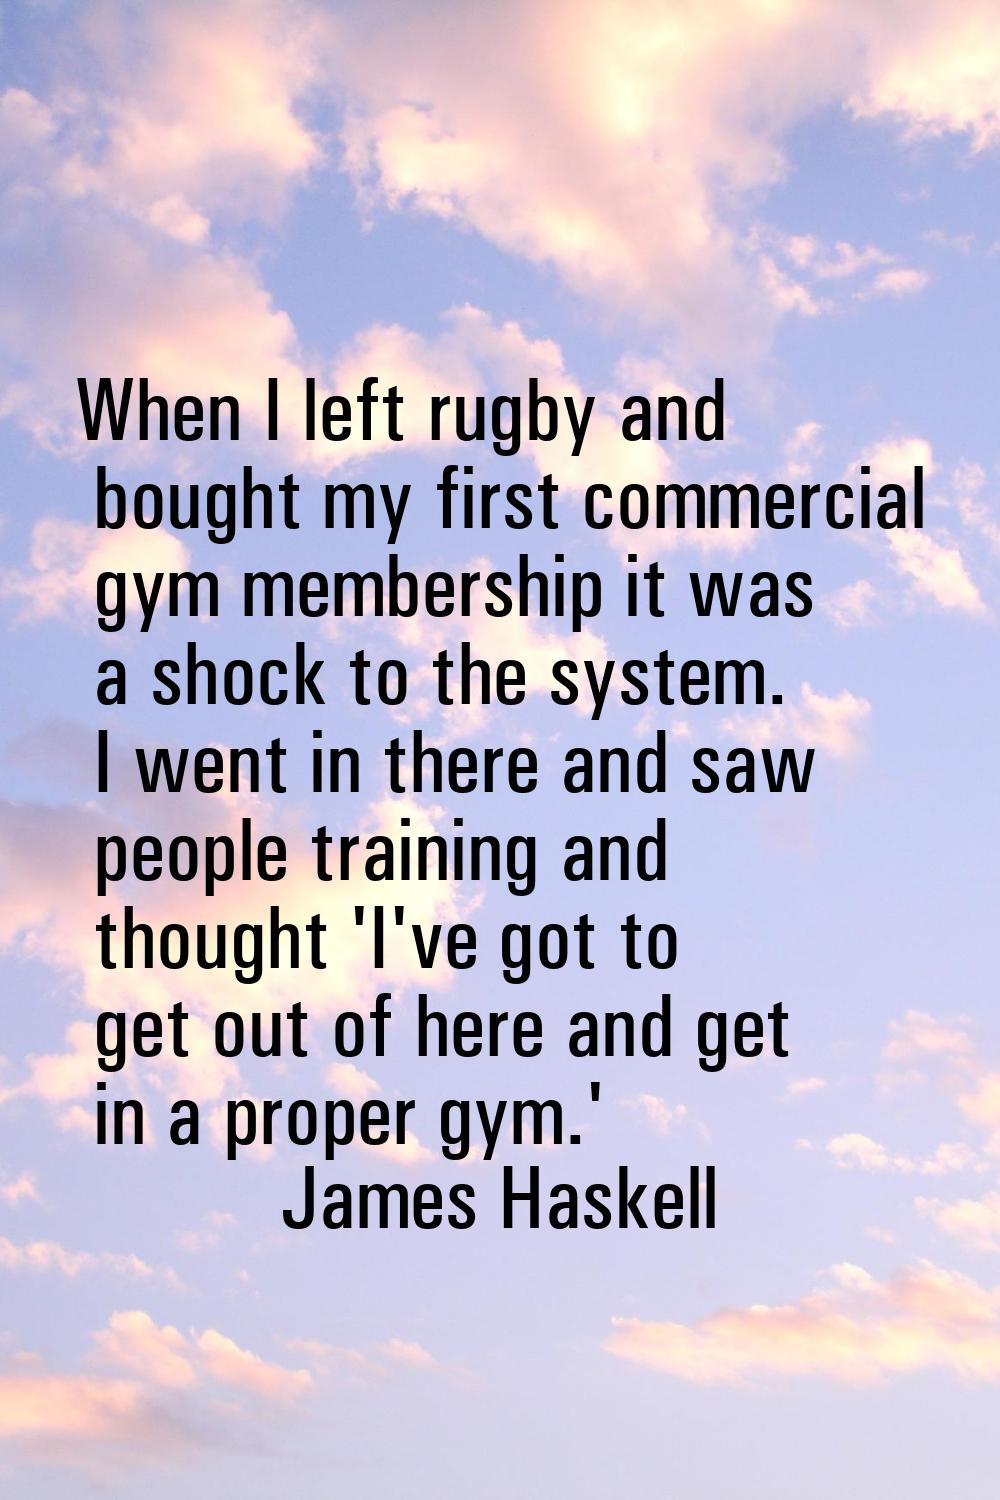 When I left rugby and bought my first commercial gym membership it was a shock to the system. I wen